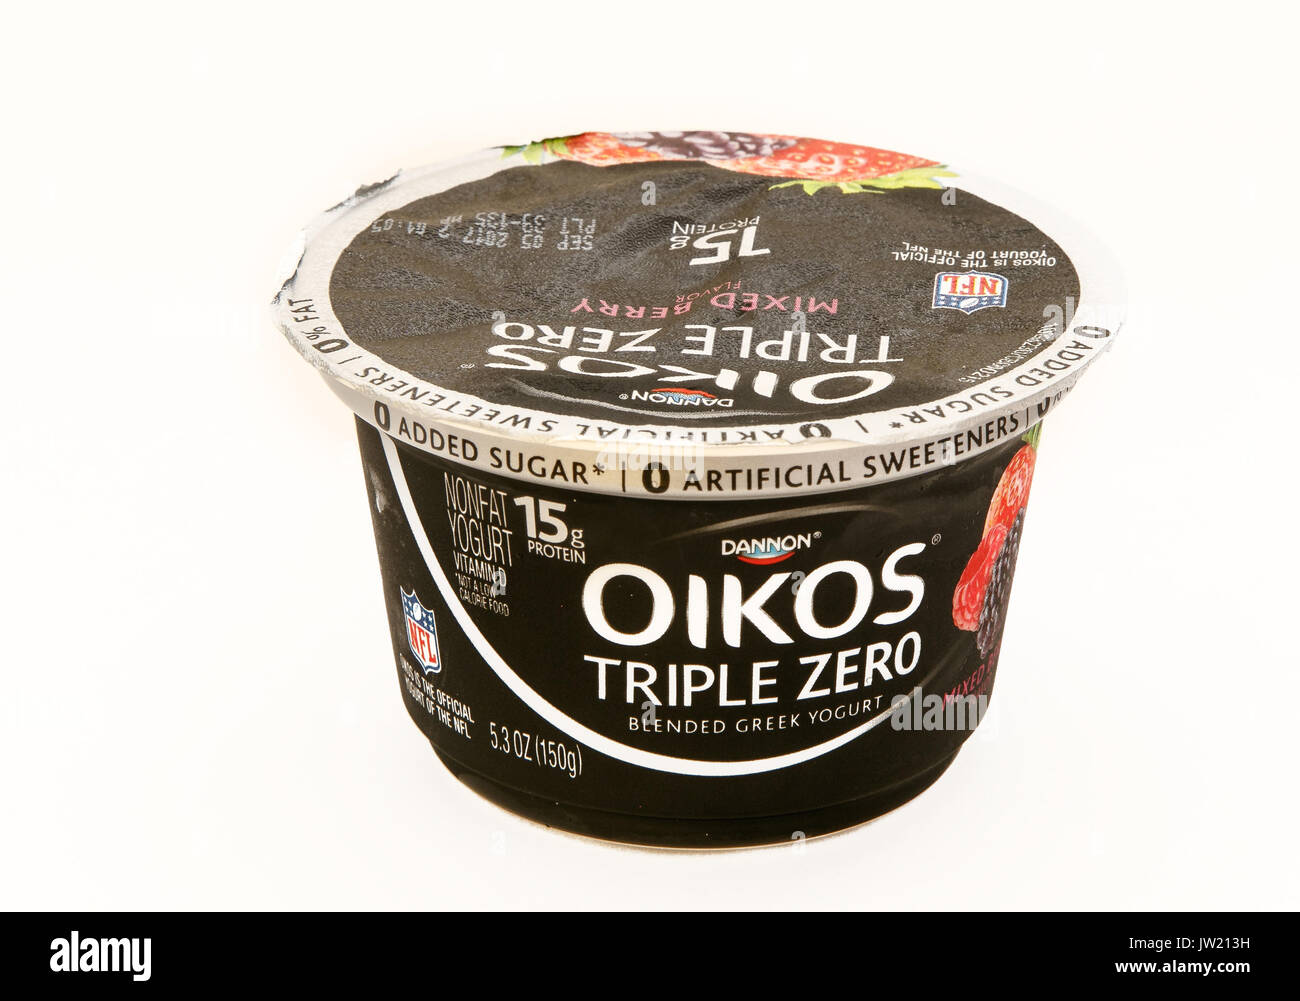 A package of Oikos Triple Zero yogurt stands against white background. Stock Photo